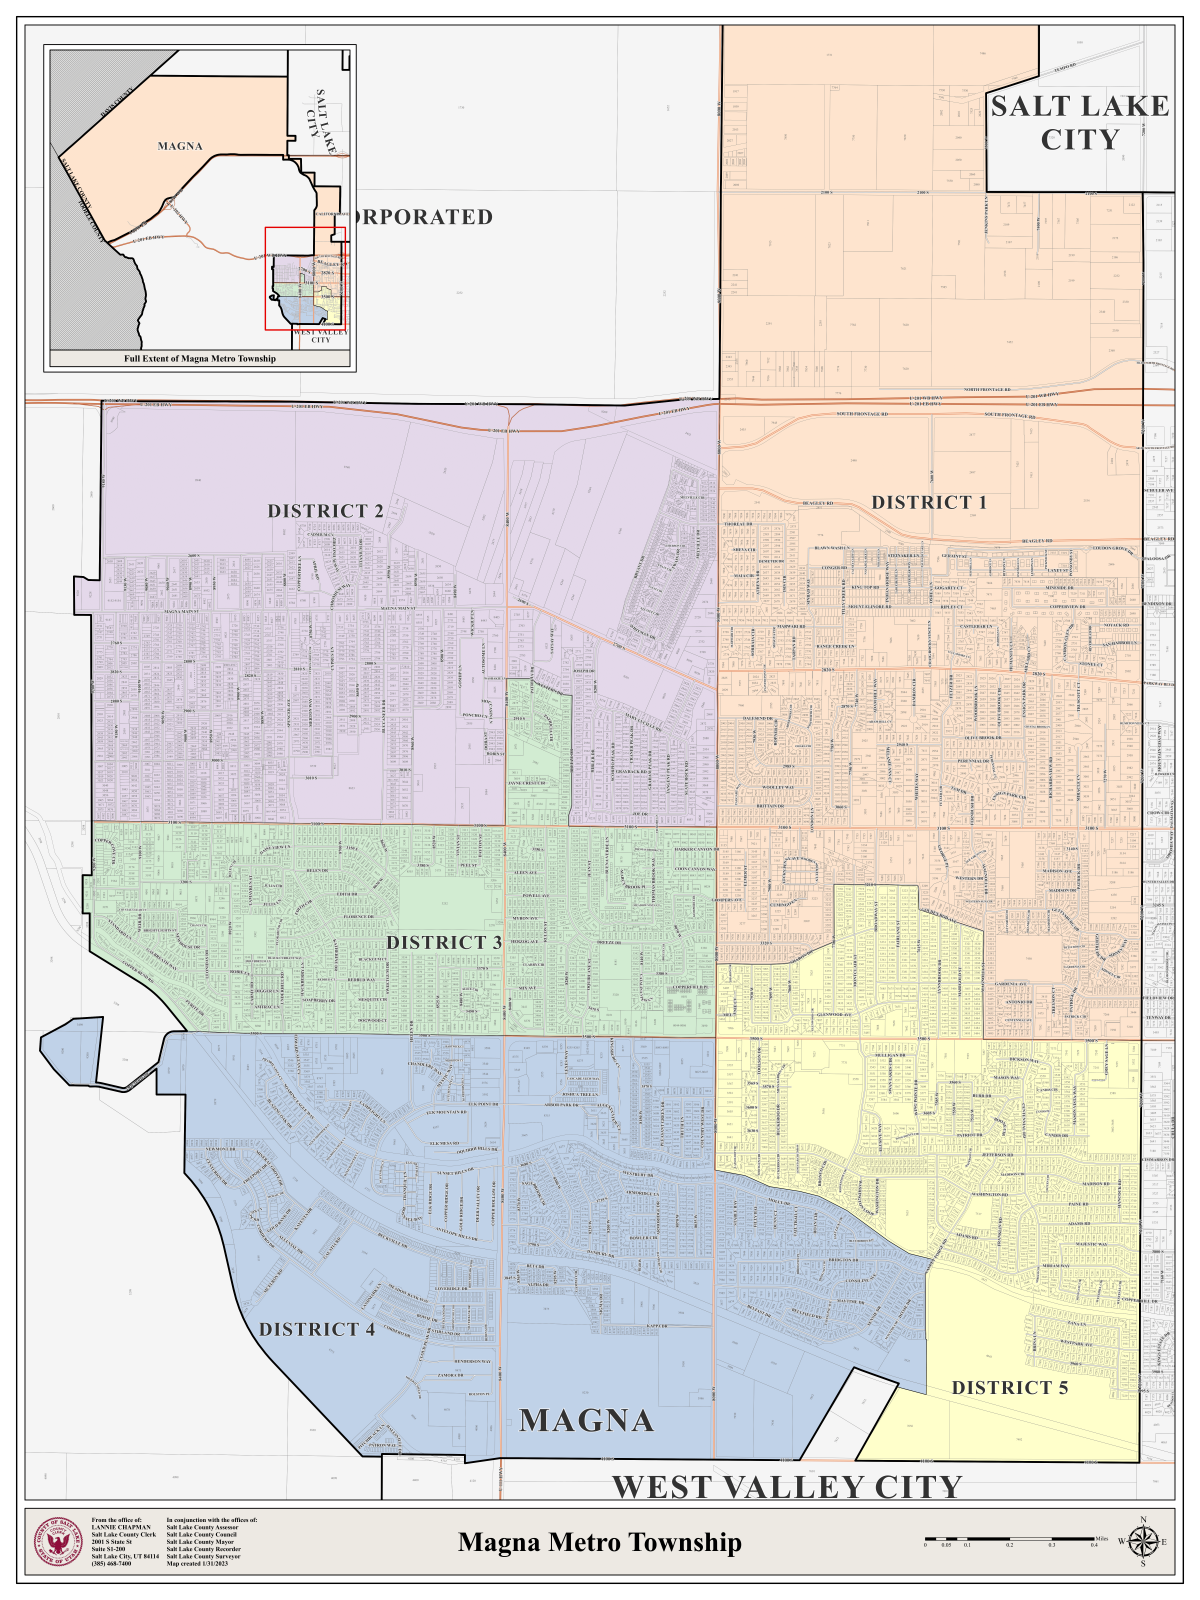 Magna Metro Township Election Districts